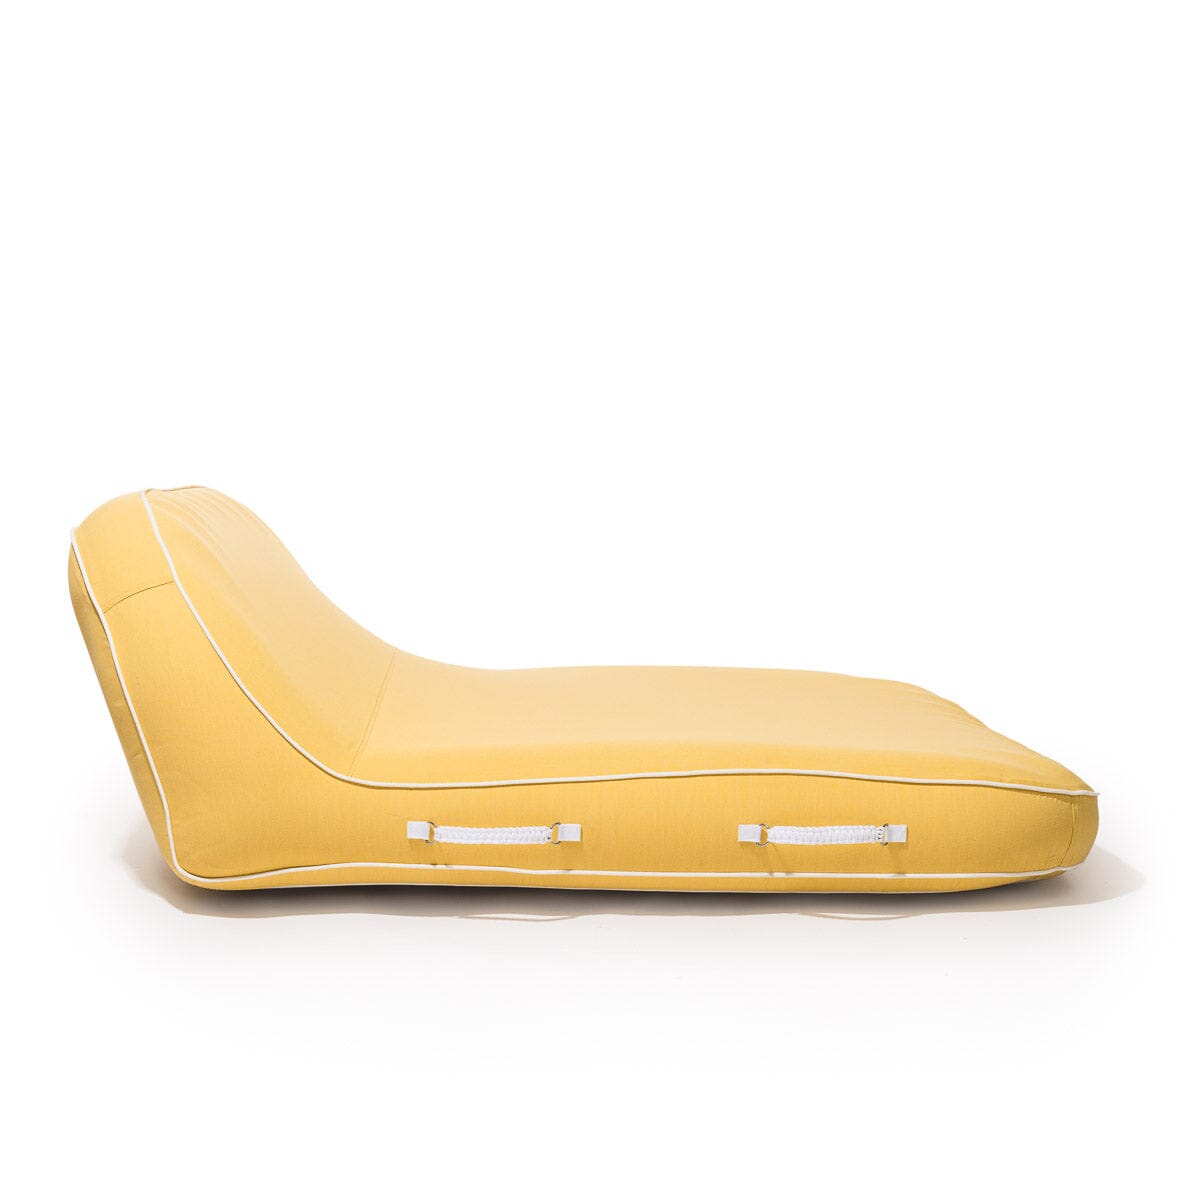 The XL Pool Lounger - Rivie Mimosa Pool Lounger Business & Pleasure Co 